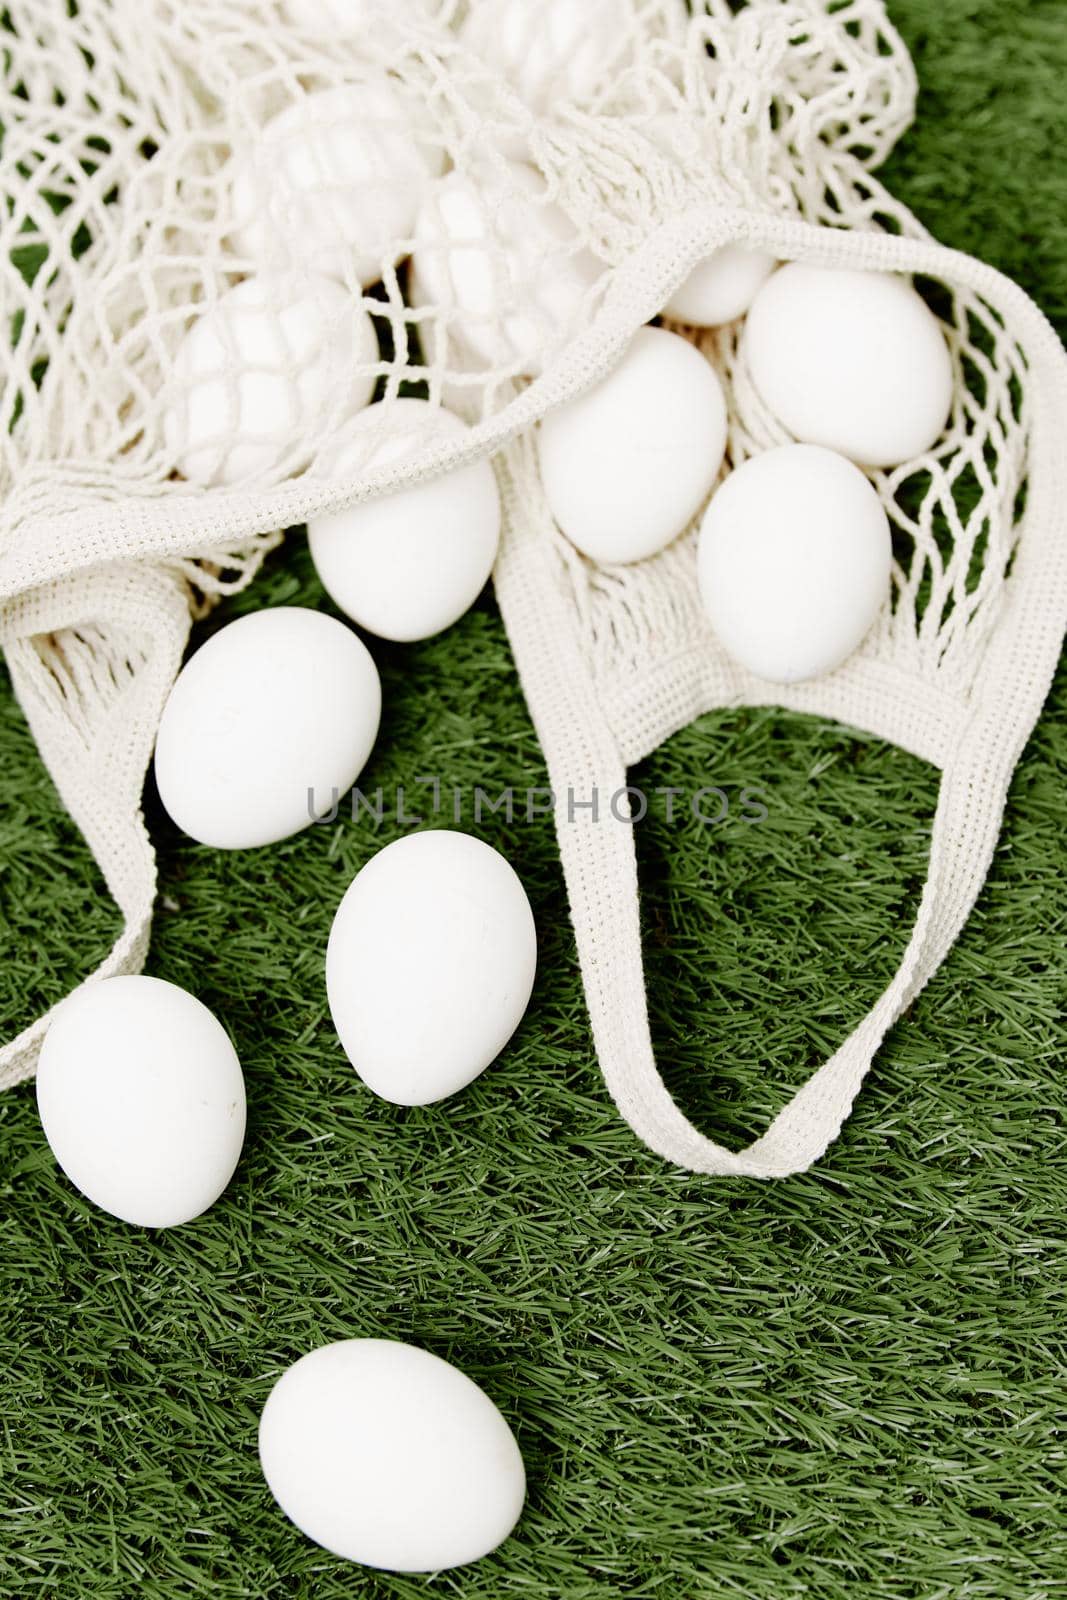 white eggs on the lawn easter christian day spring. High quality photo